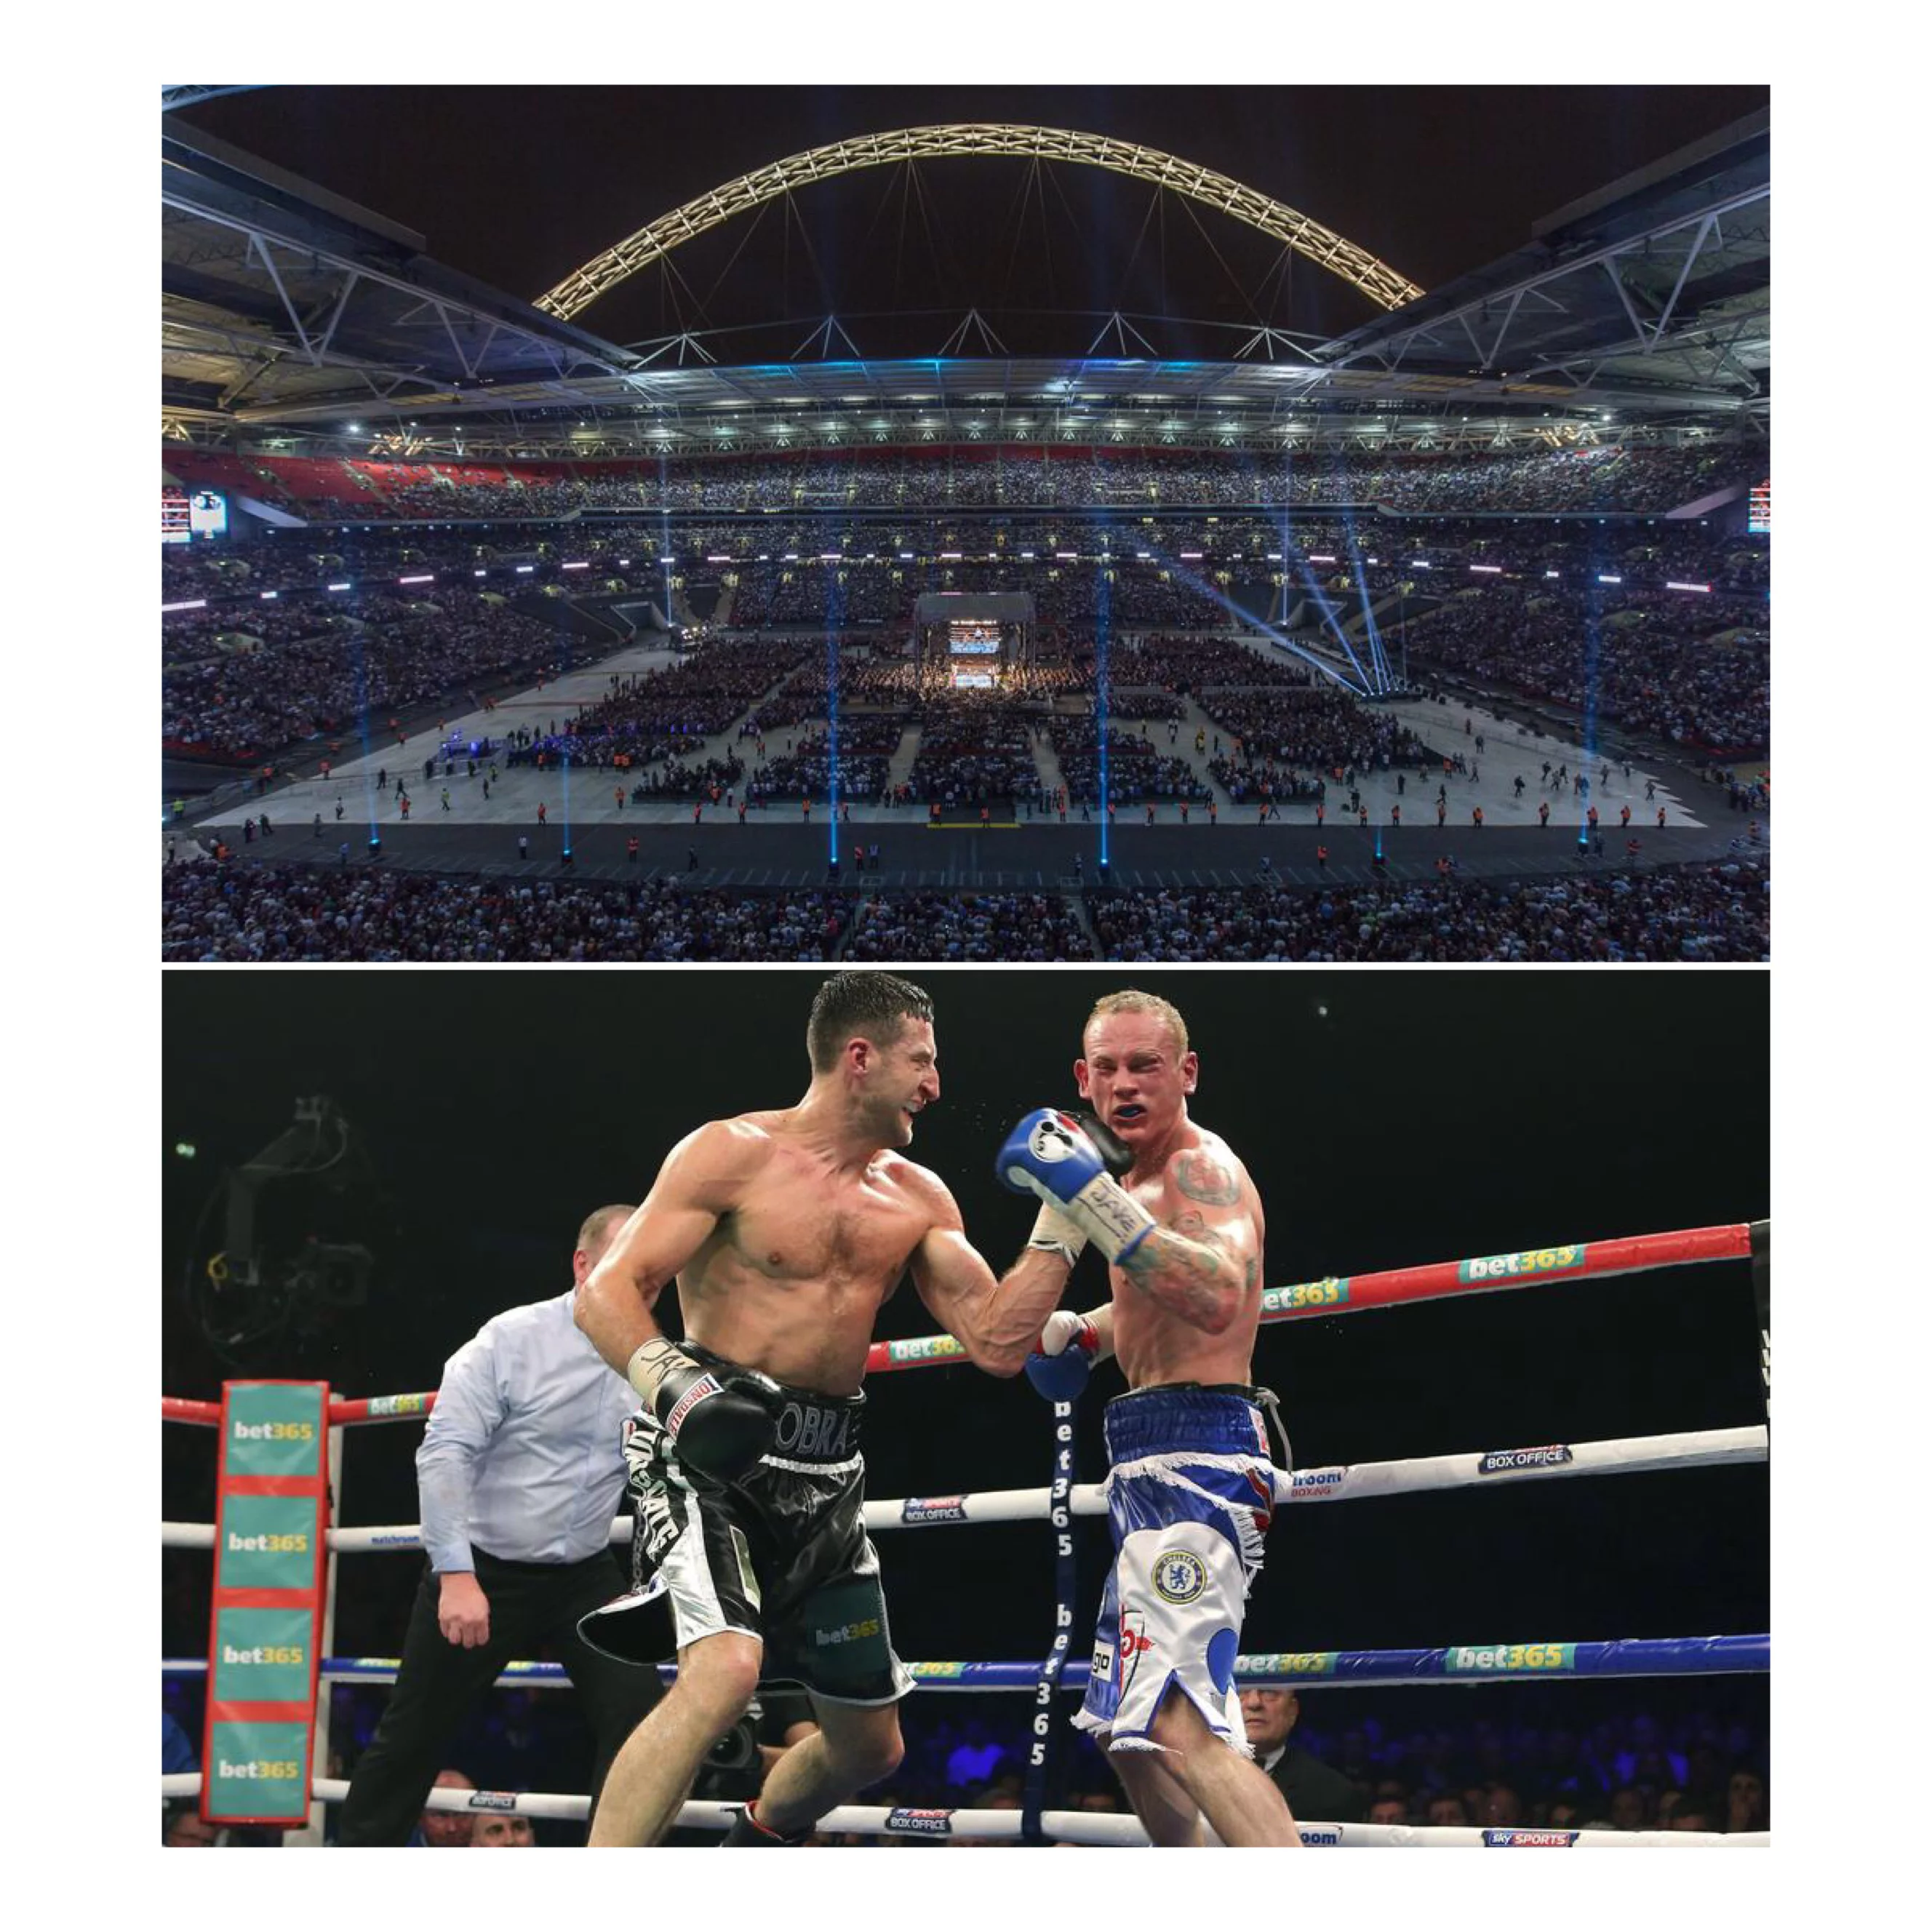 80,000 fans packed into Wembley Stadium on 31st May 2014 to see Froch v Groves 2